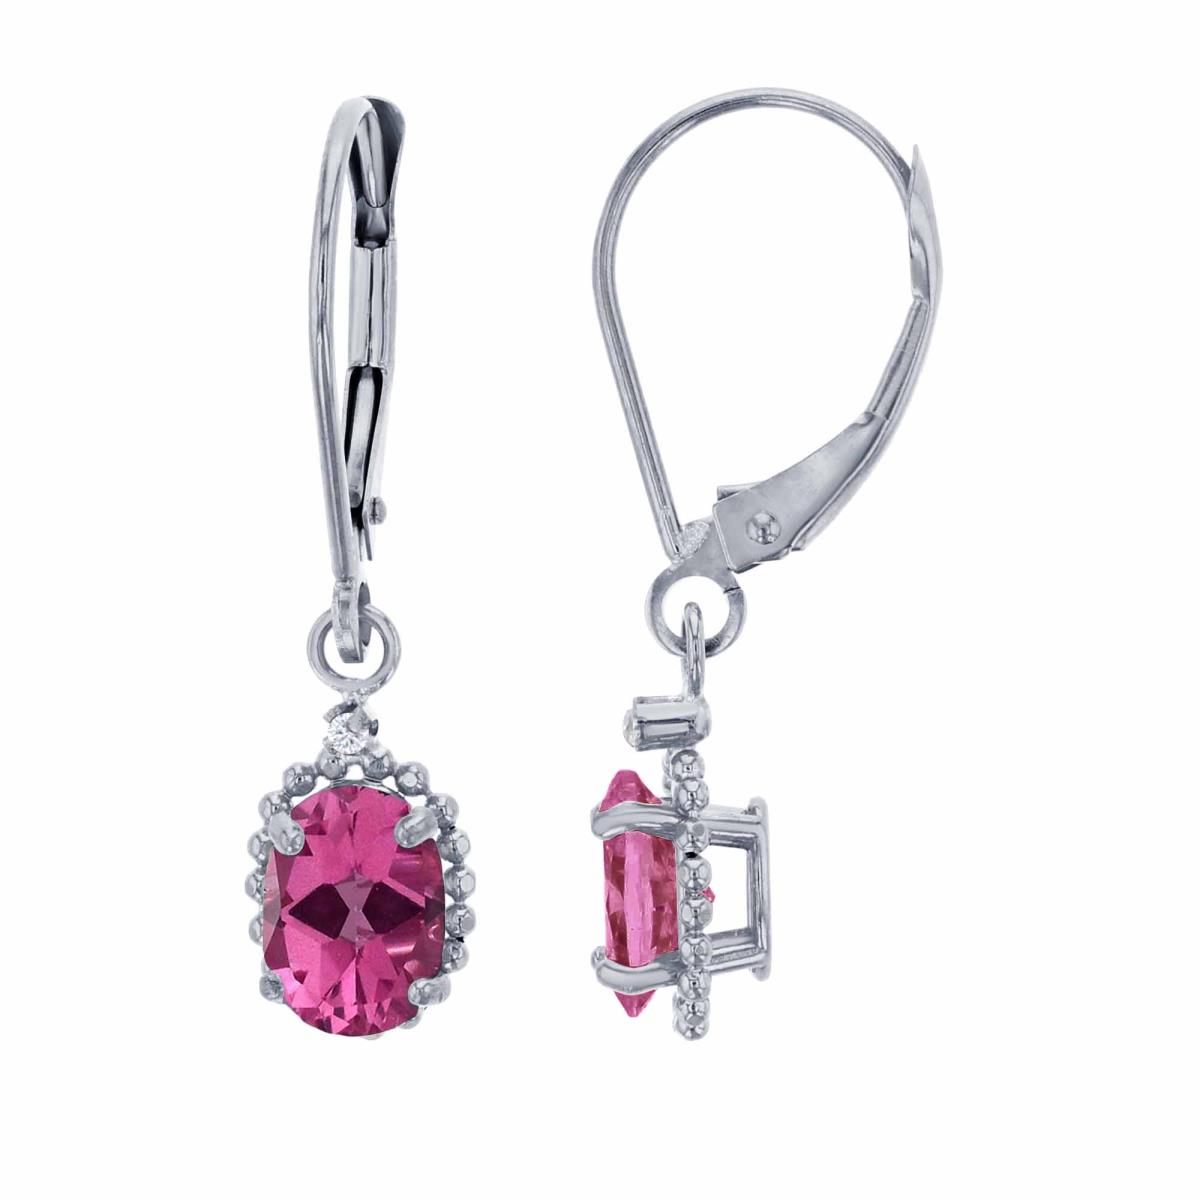 14K White Gold 1.25mm Rd White Topaz & 6x4mm Ov Pure Pink Bead Frame Drop Lever-Back Earring